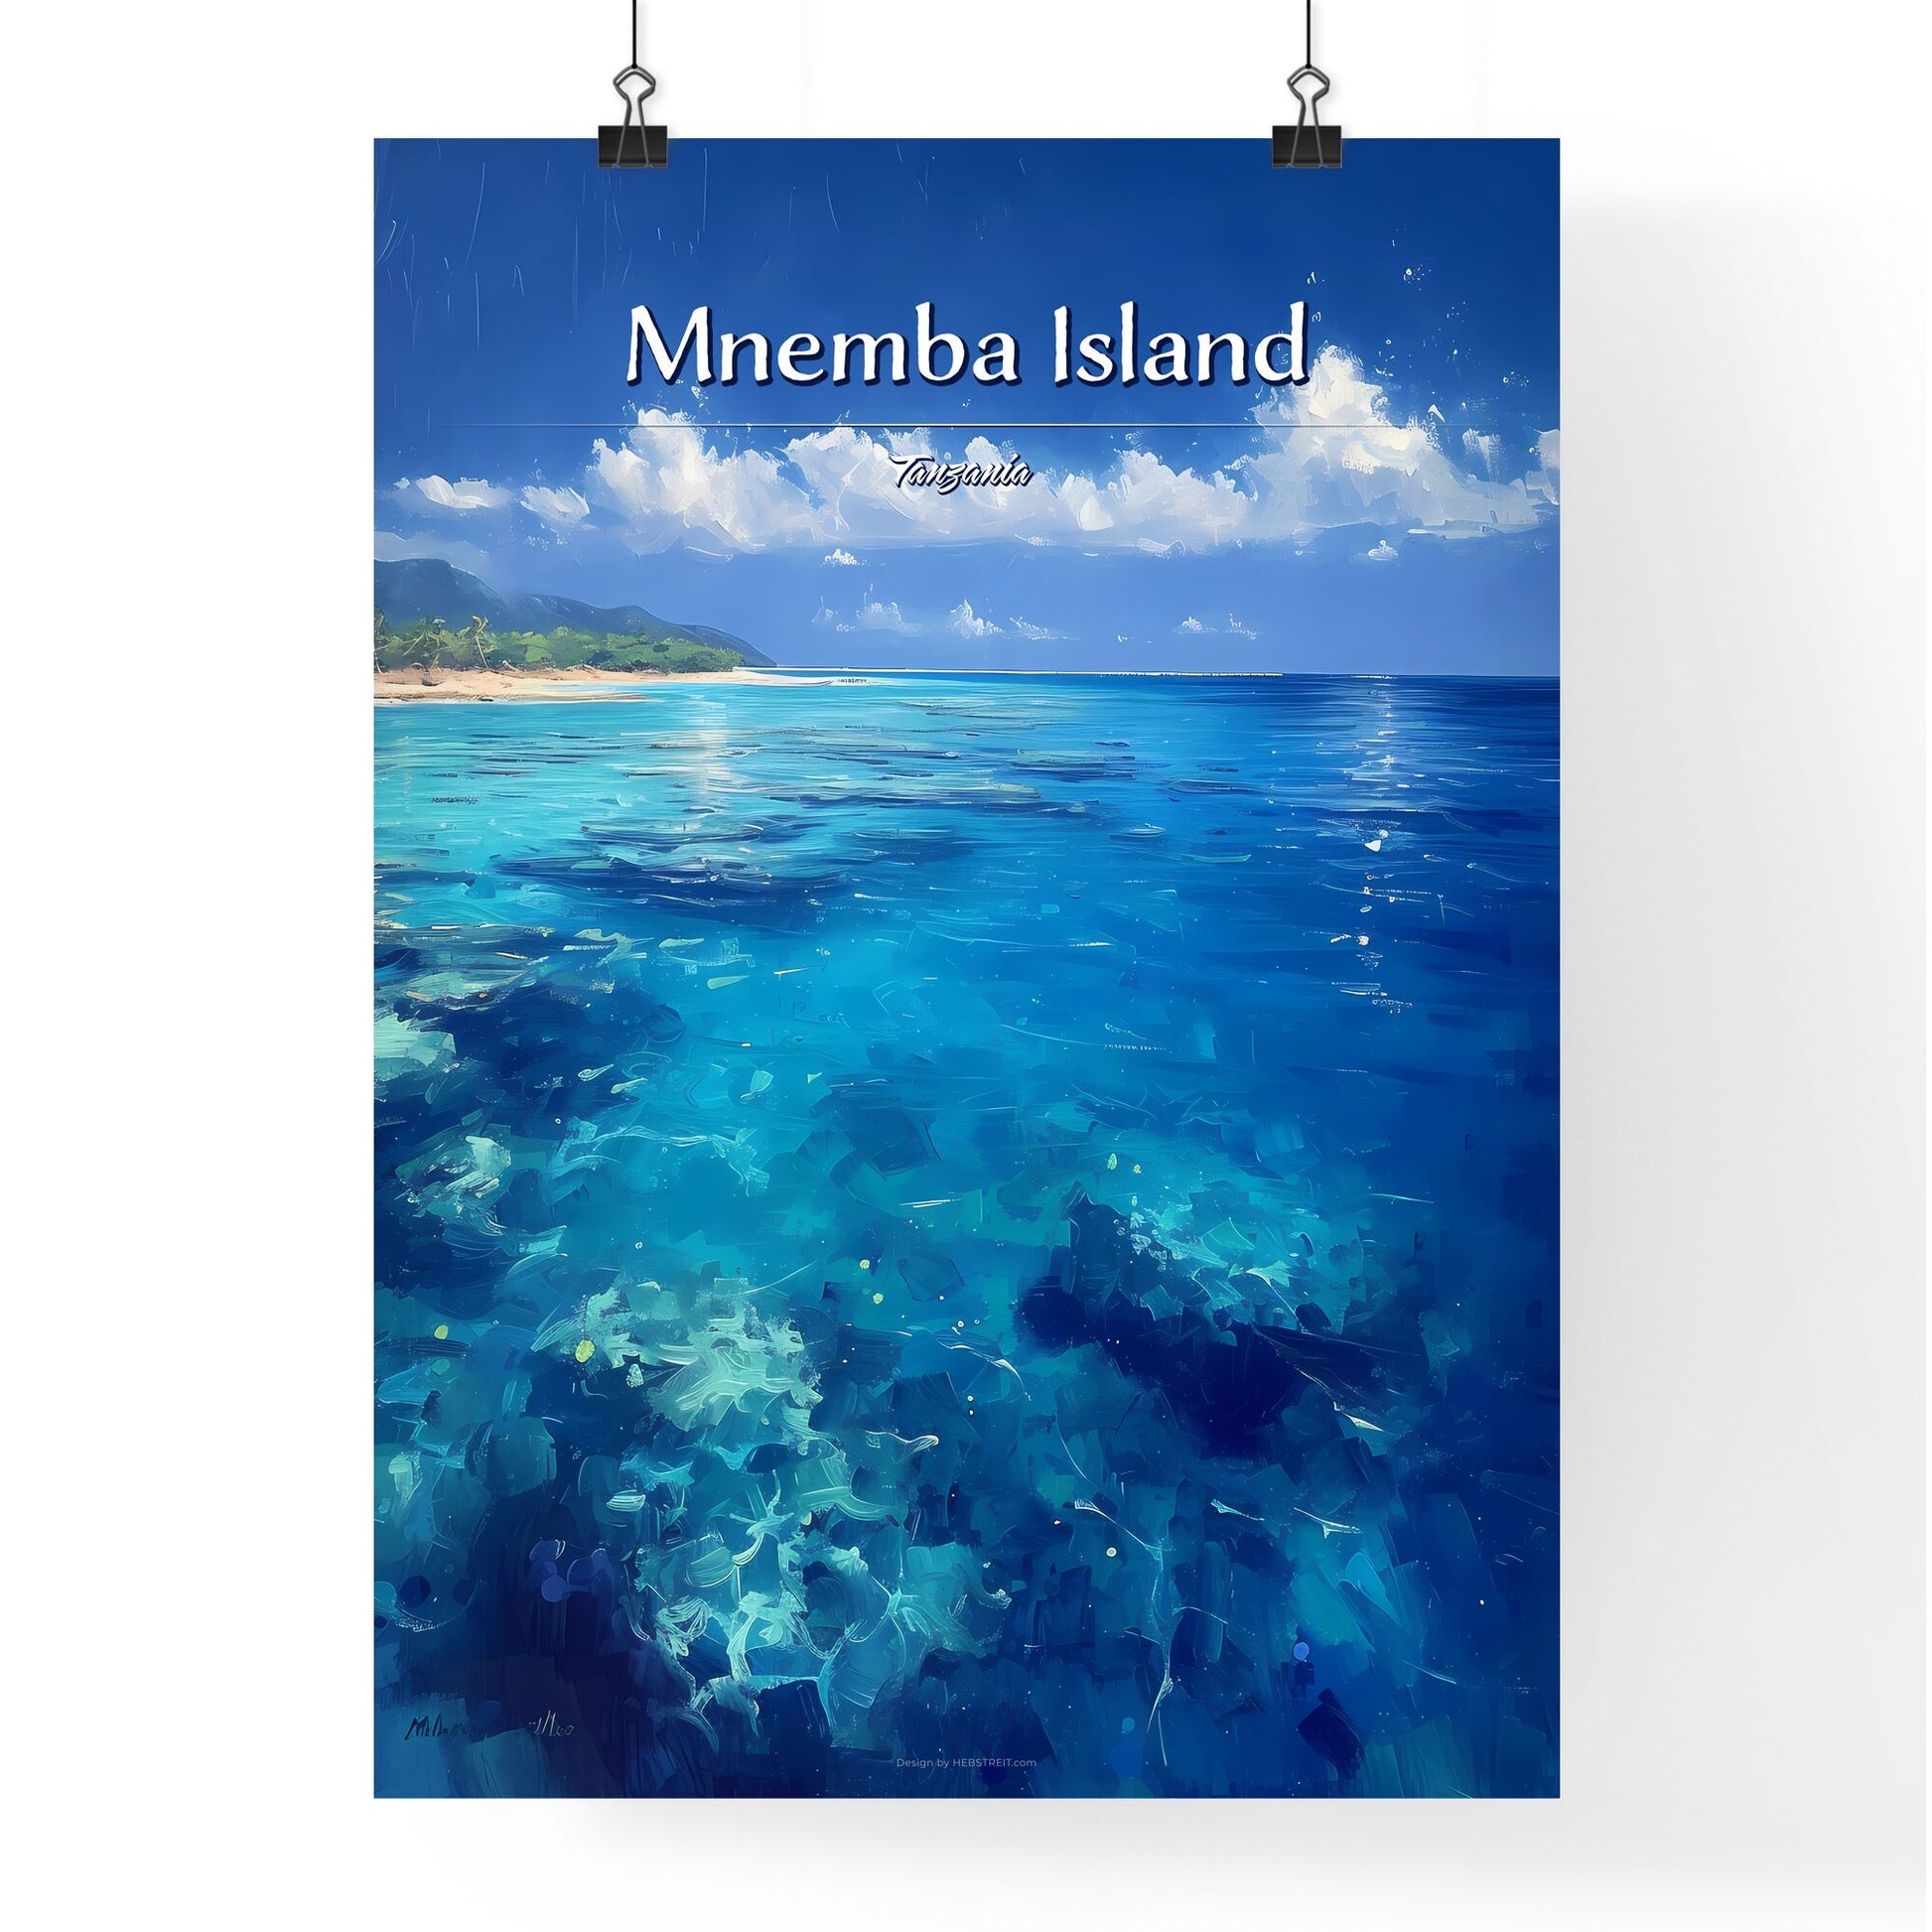 Mnemba Island, Tanzania - Art print of a blue ocean with trees and a blue sky Default Title